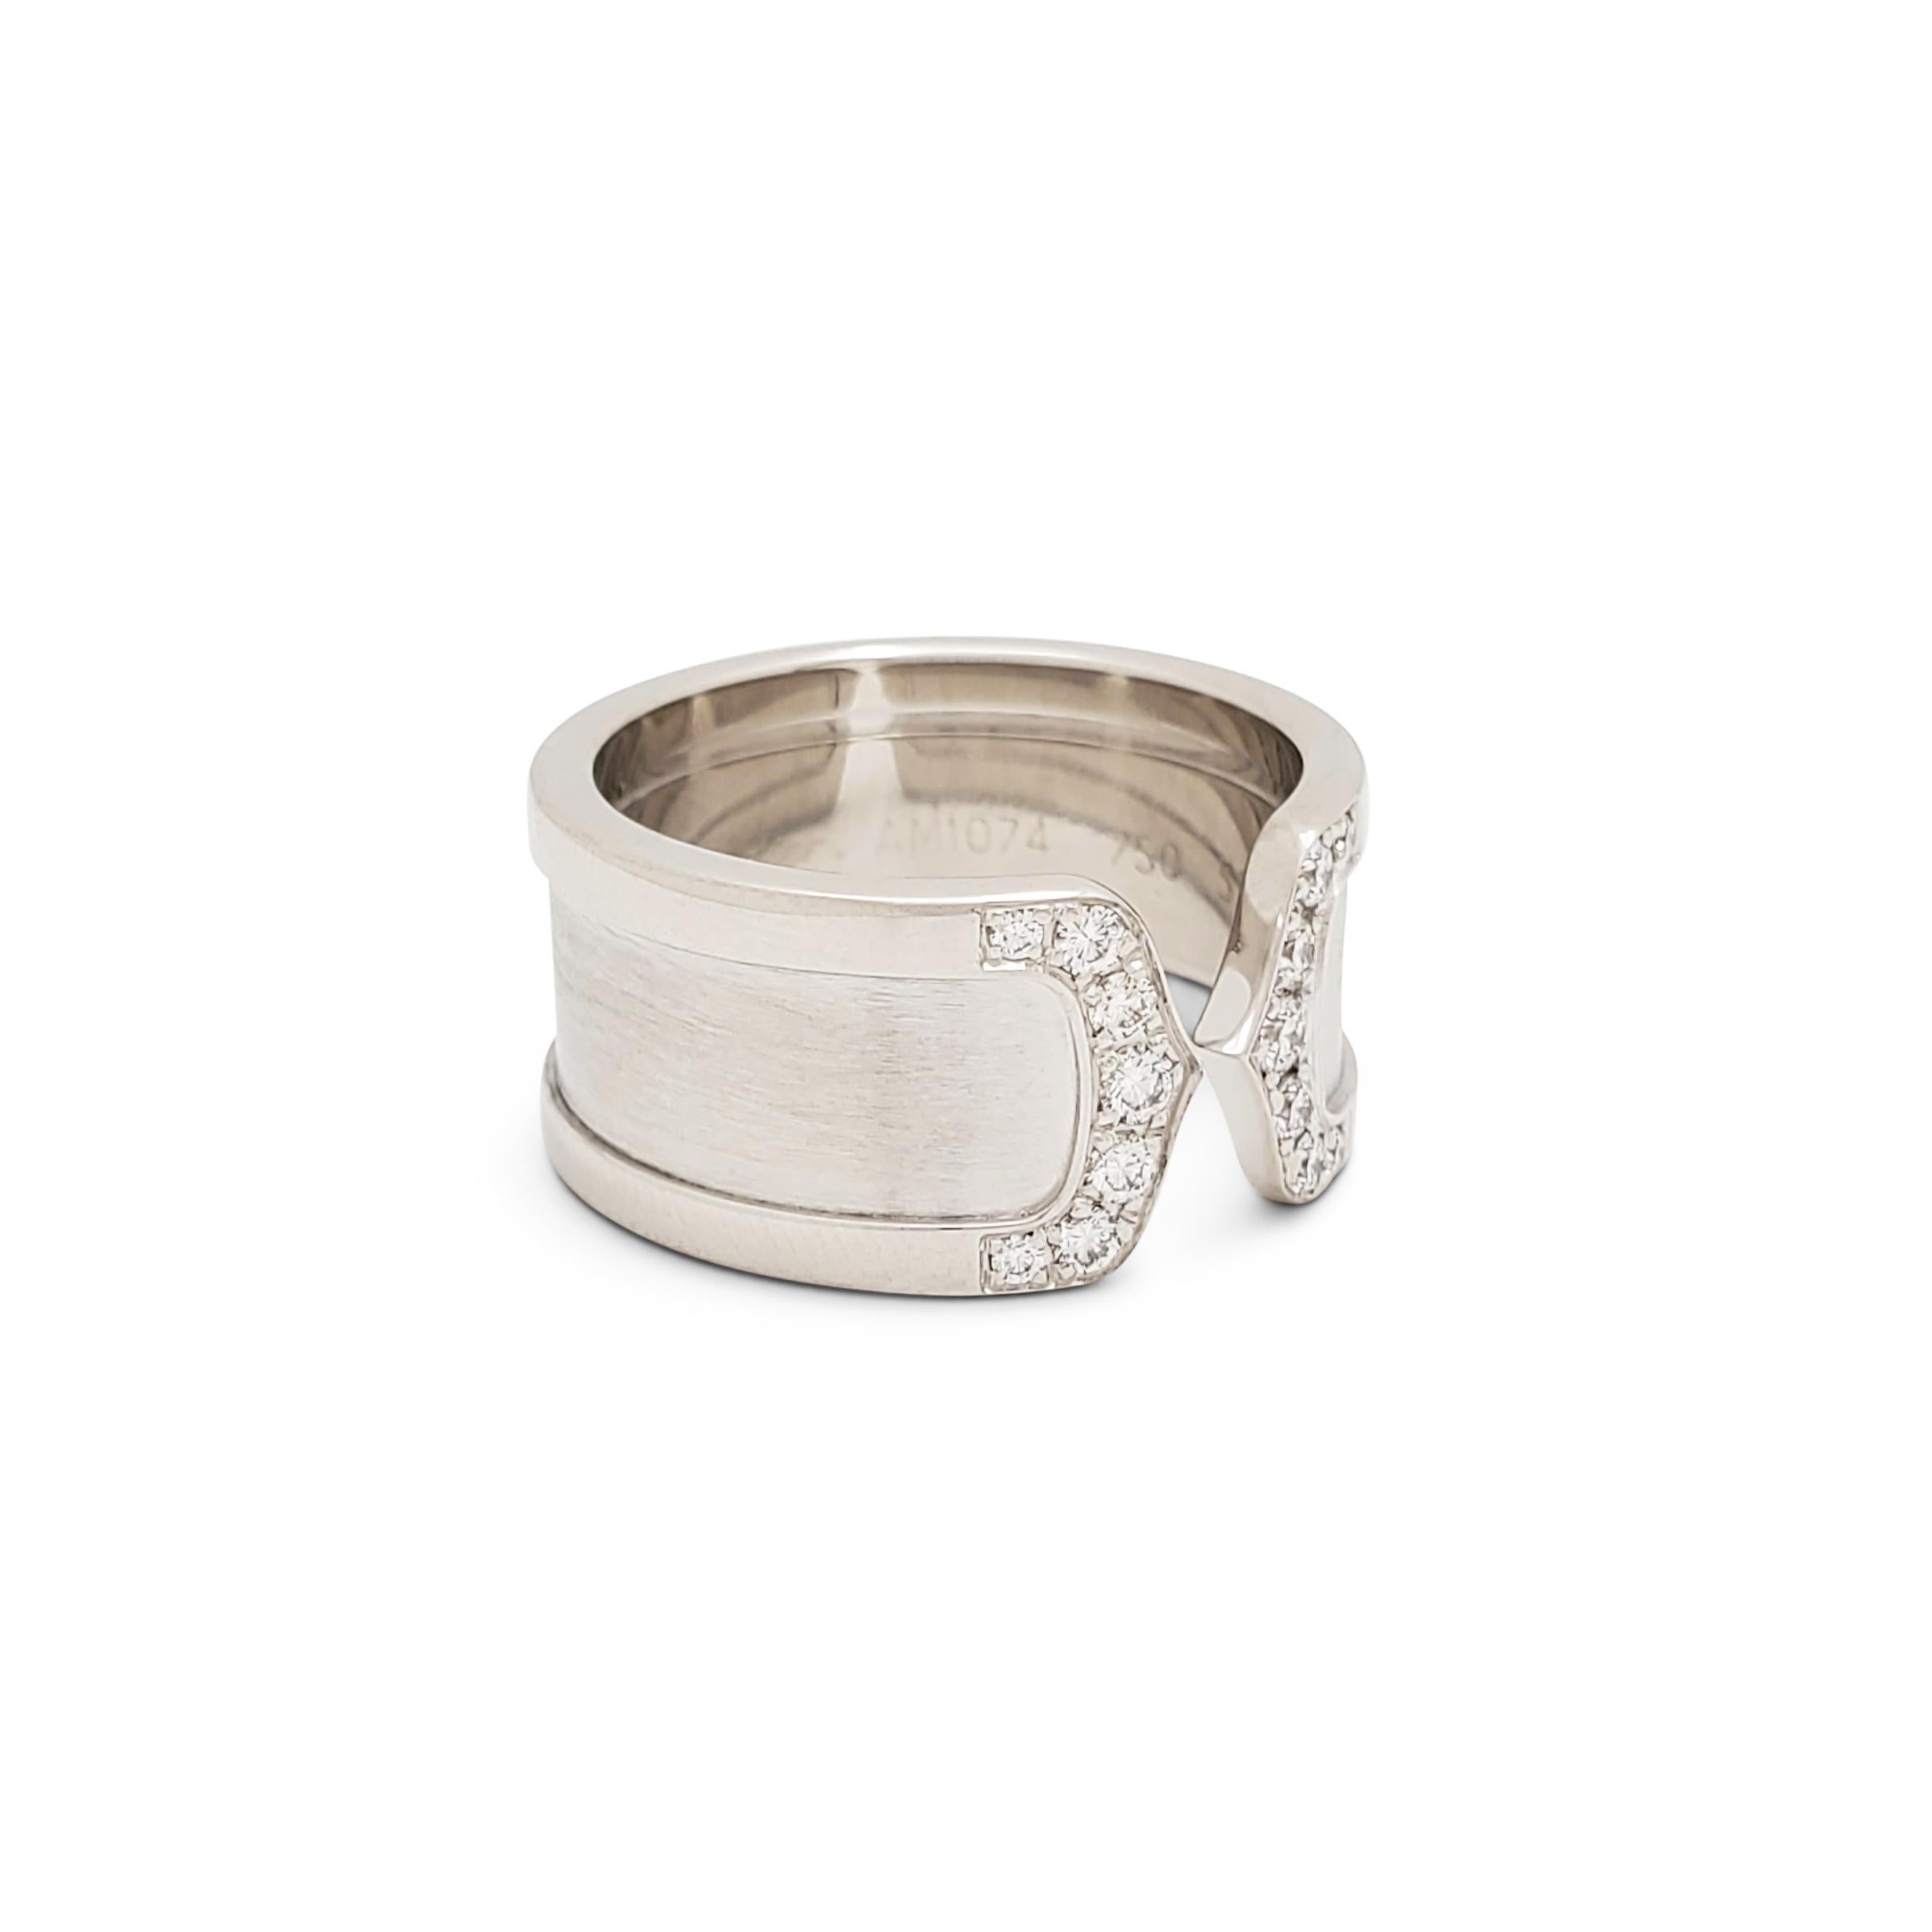 Authentic Cartier 'C De Cartier' ring crafted in 18 karat white gold. The split ring is comprised of a band of brushed white gold framed by high polished white gold. The C motif at each end is set with round brilliant cut diamonds of an estimated